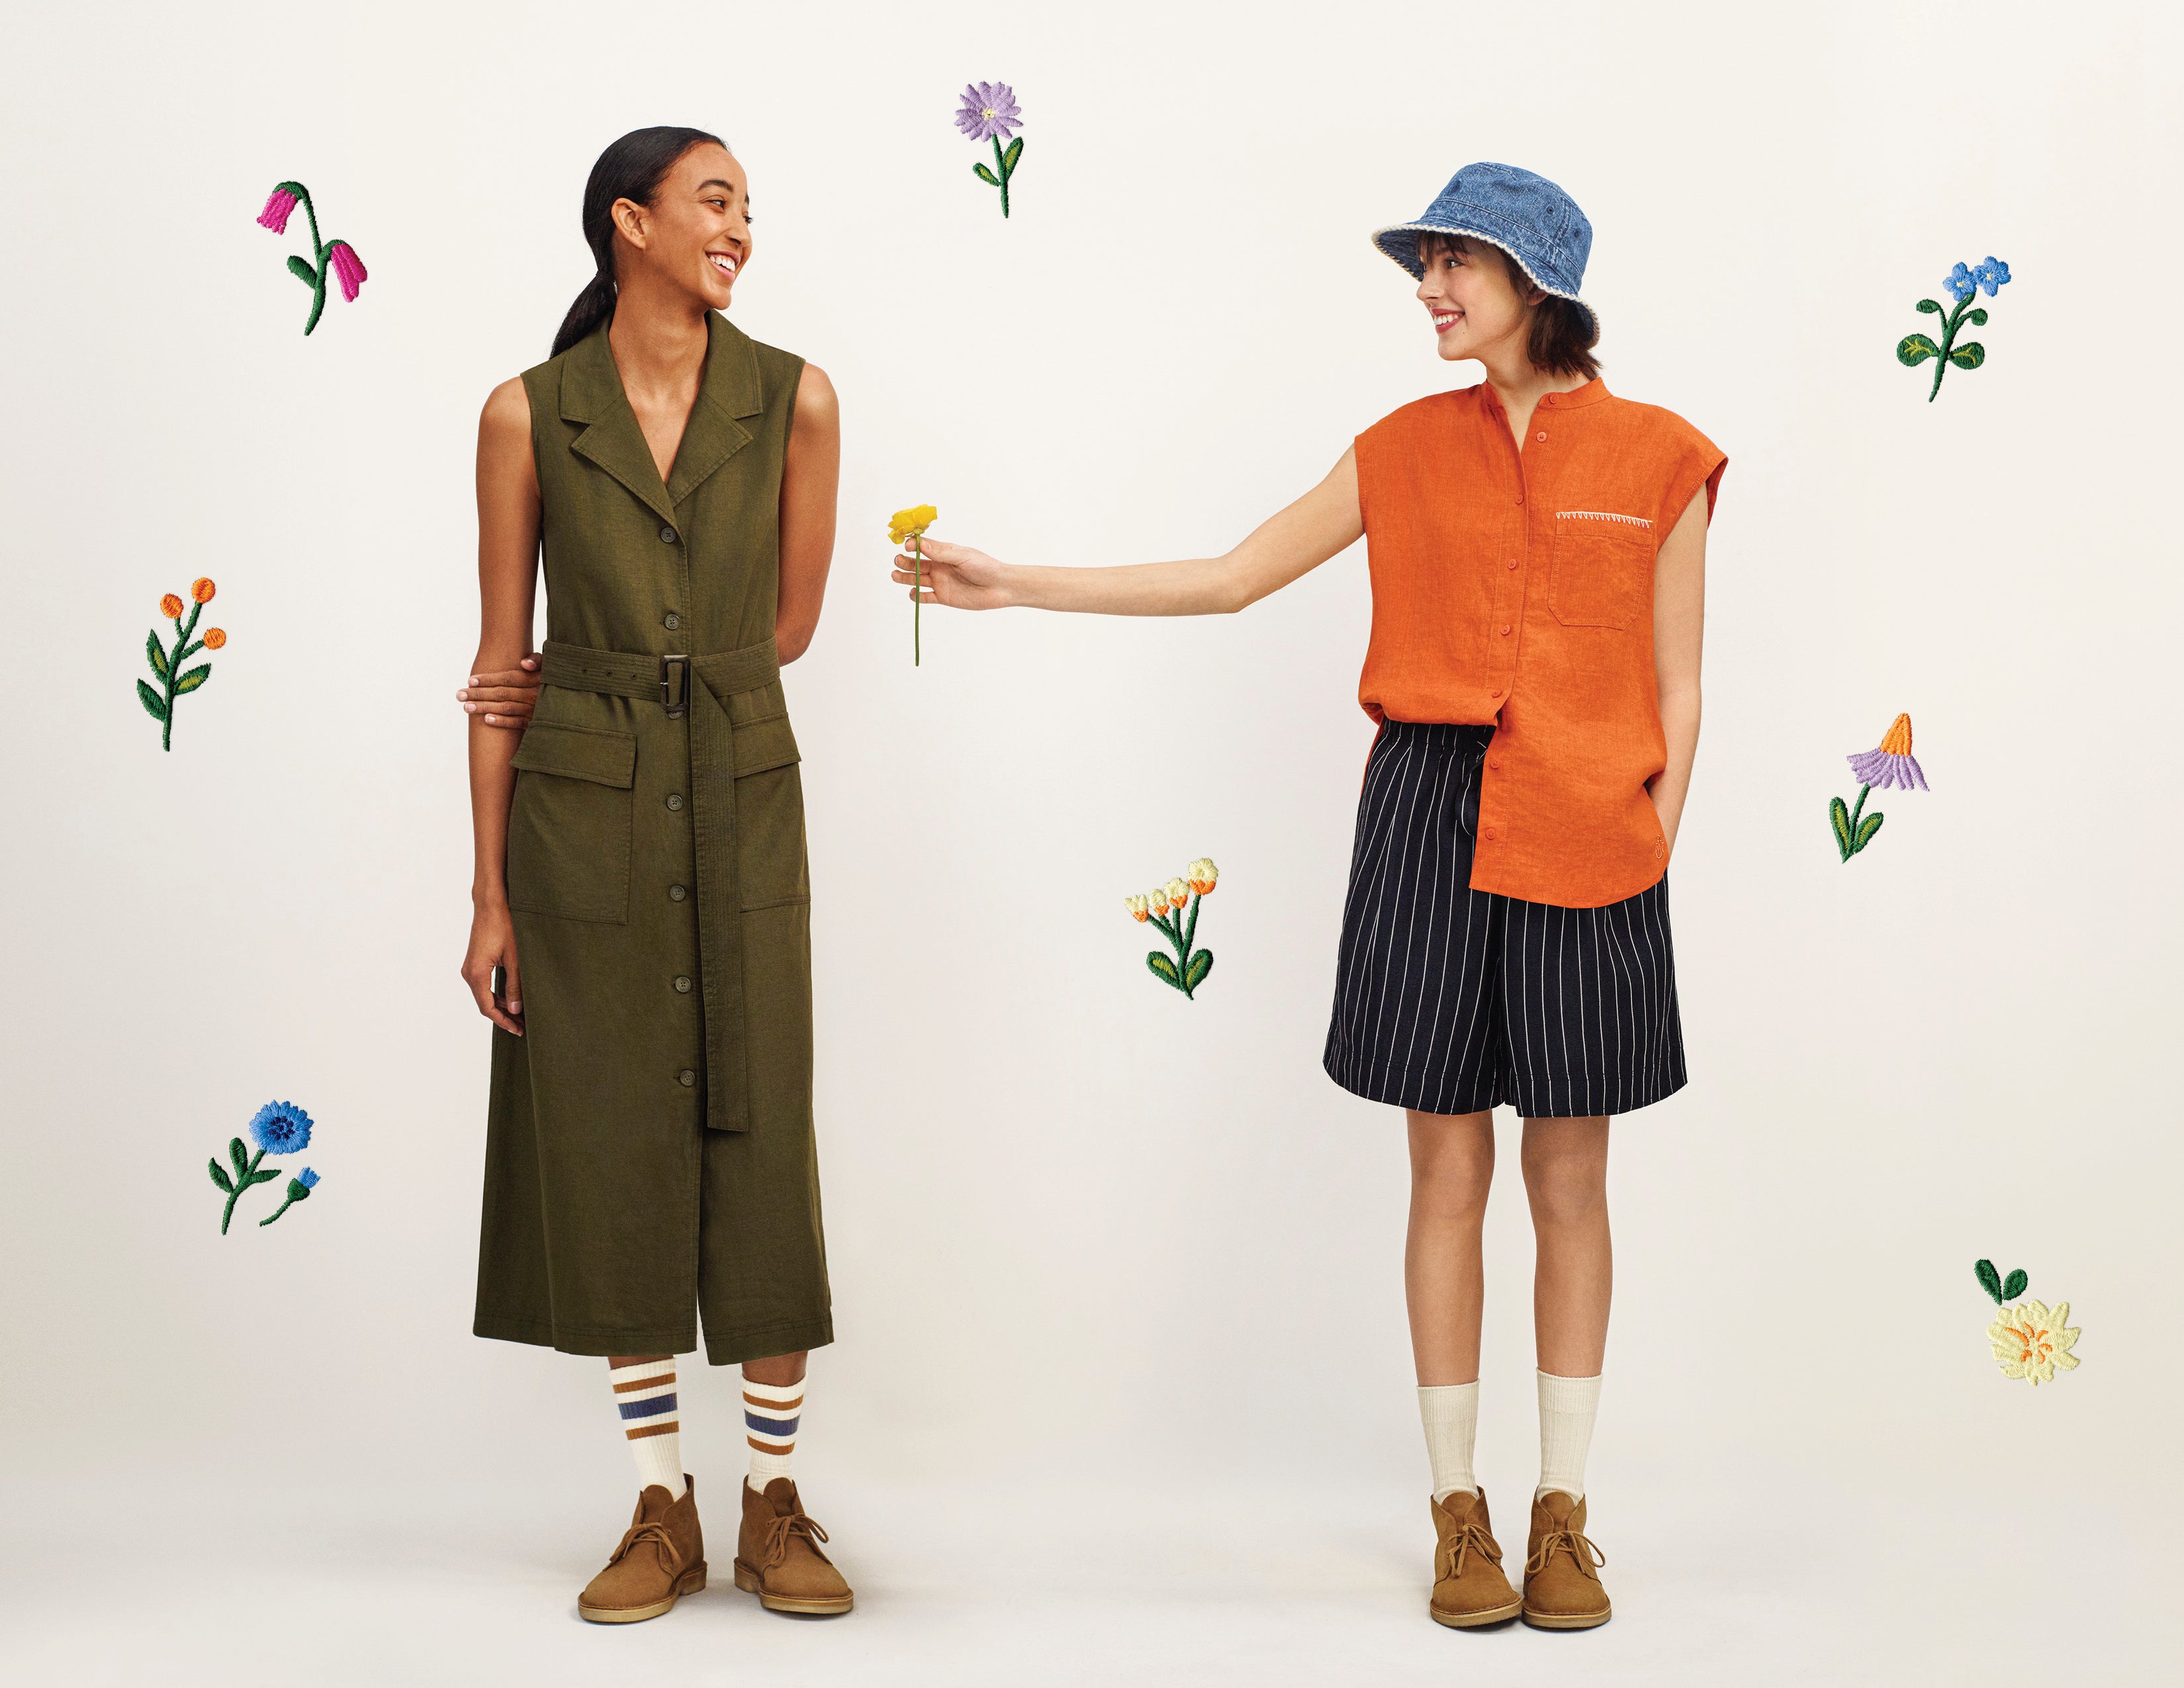 JW Anderson X Uniqlo Spring 2021 Collection Has Arrived